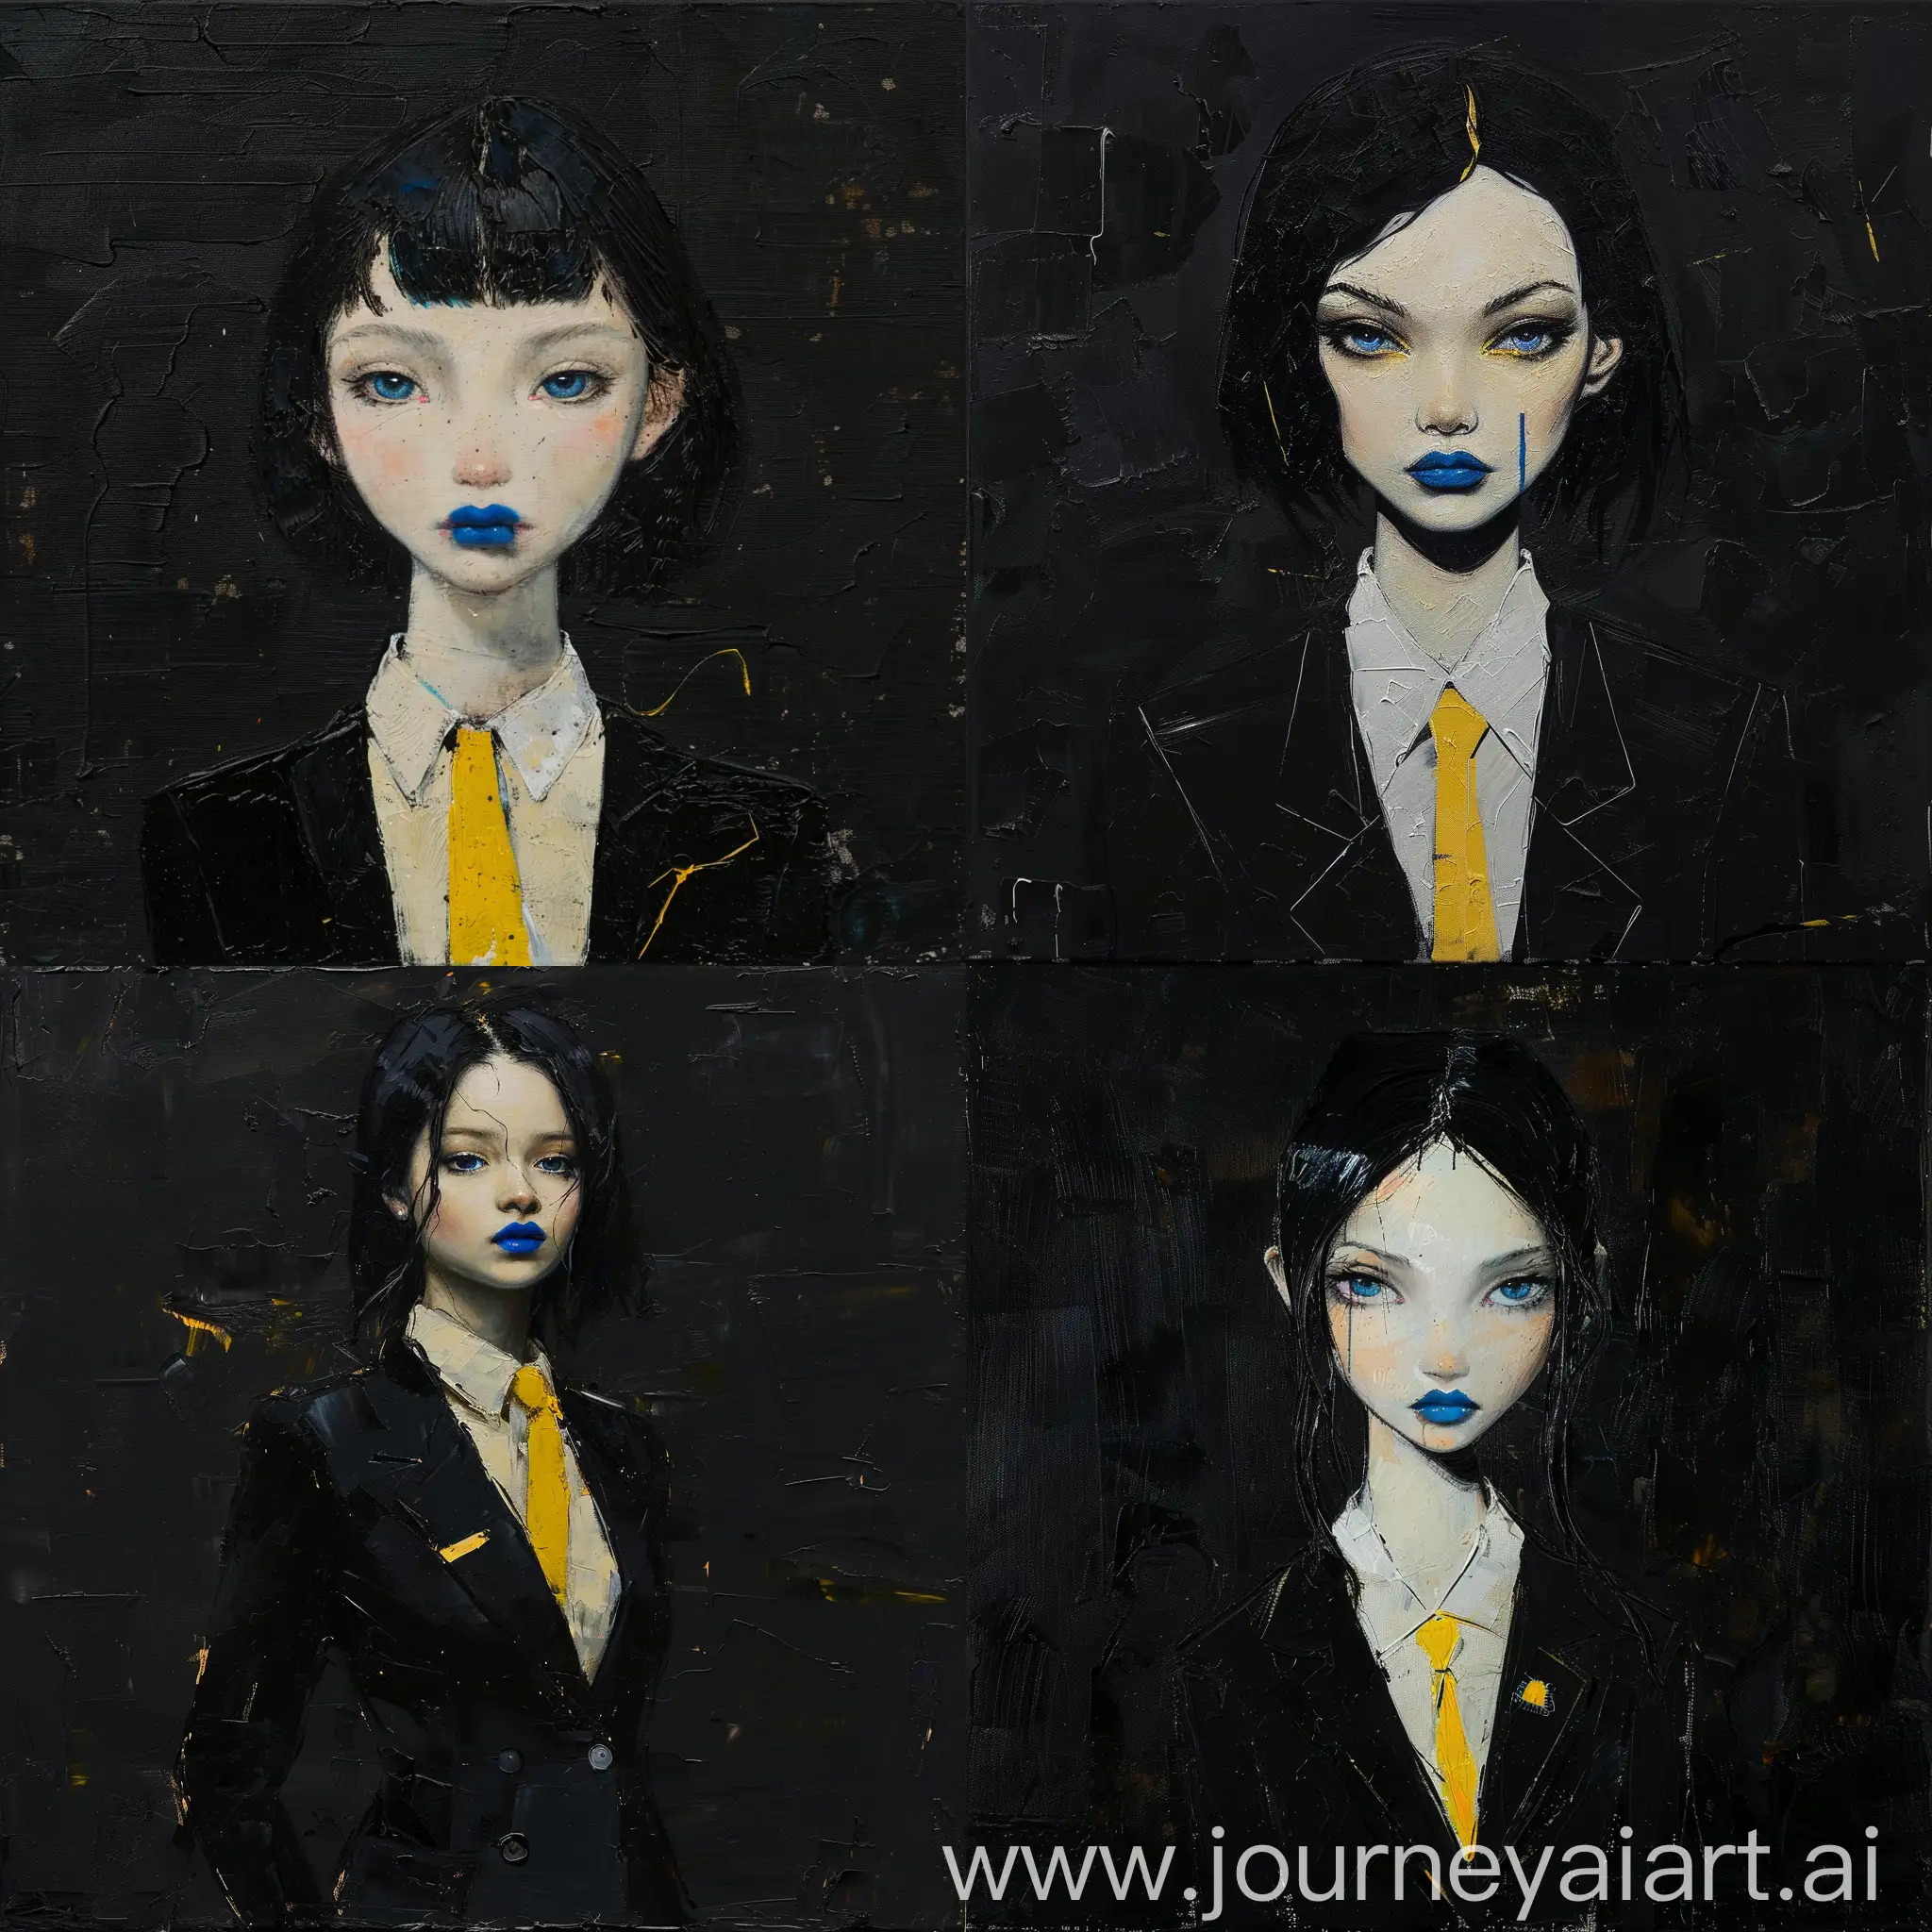 painting  A beautiful girl with black hair, a square, blue lips, stands in a classic black suit, yellow tie painted in oil on a textured canvas, set against a stark black background, striking contrast, fluidity and grace of the traditional figure